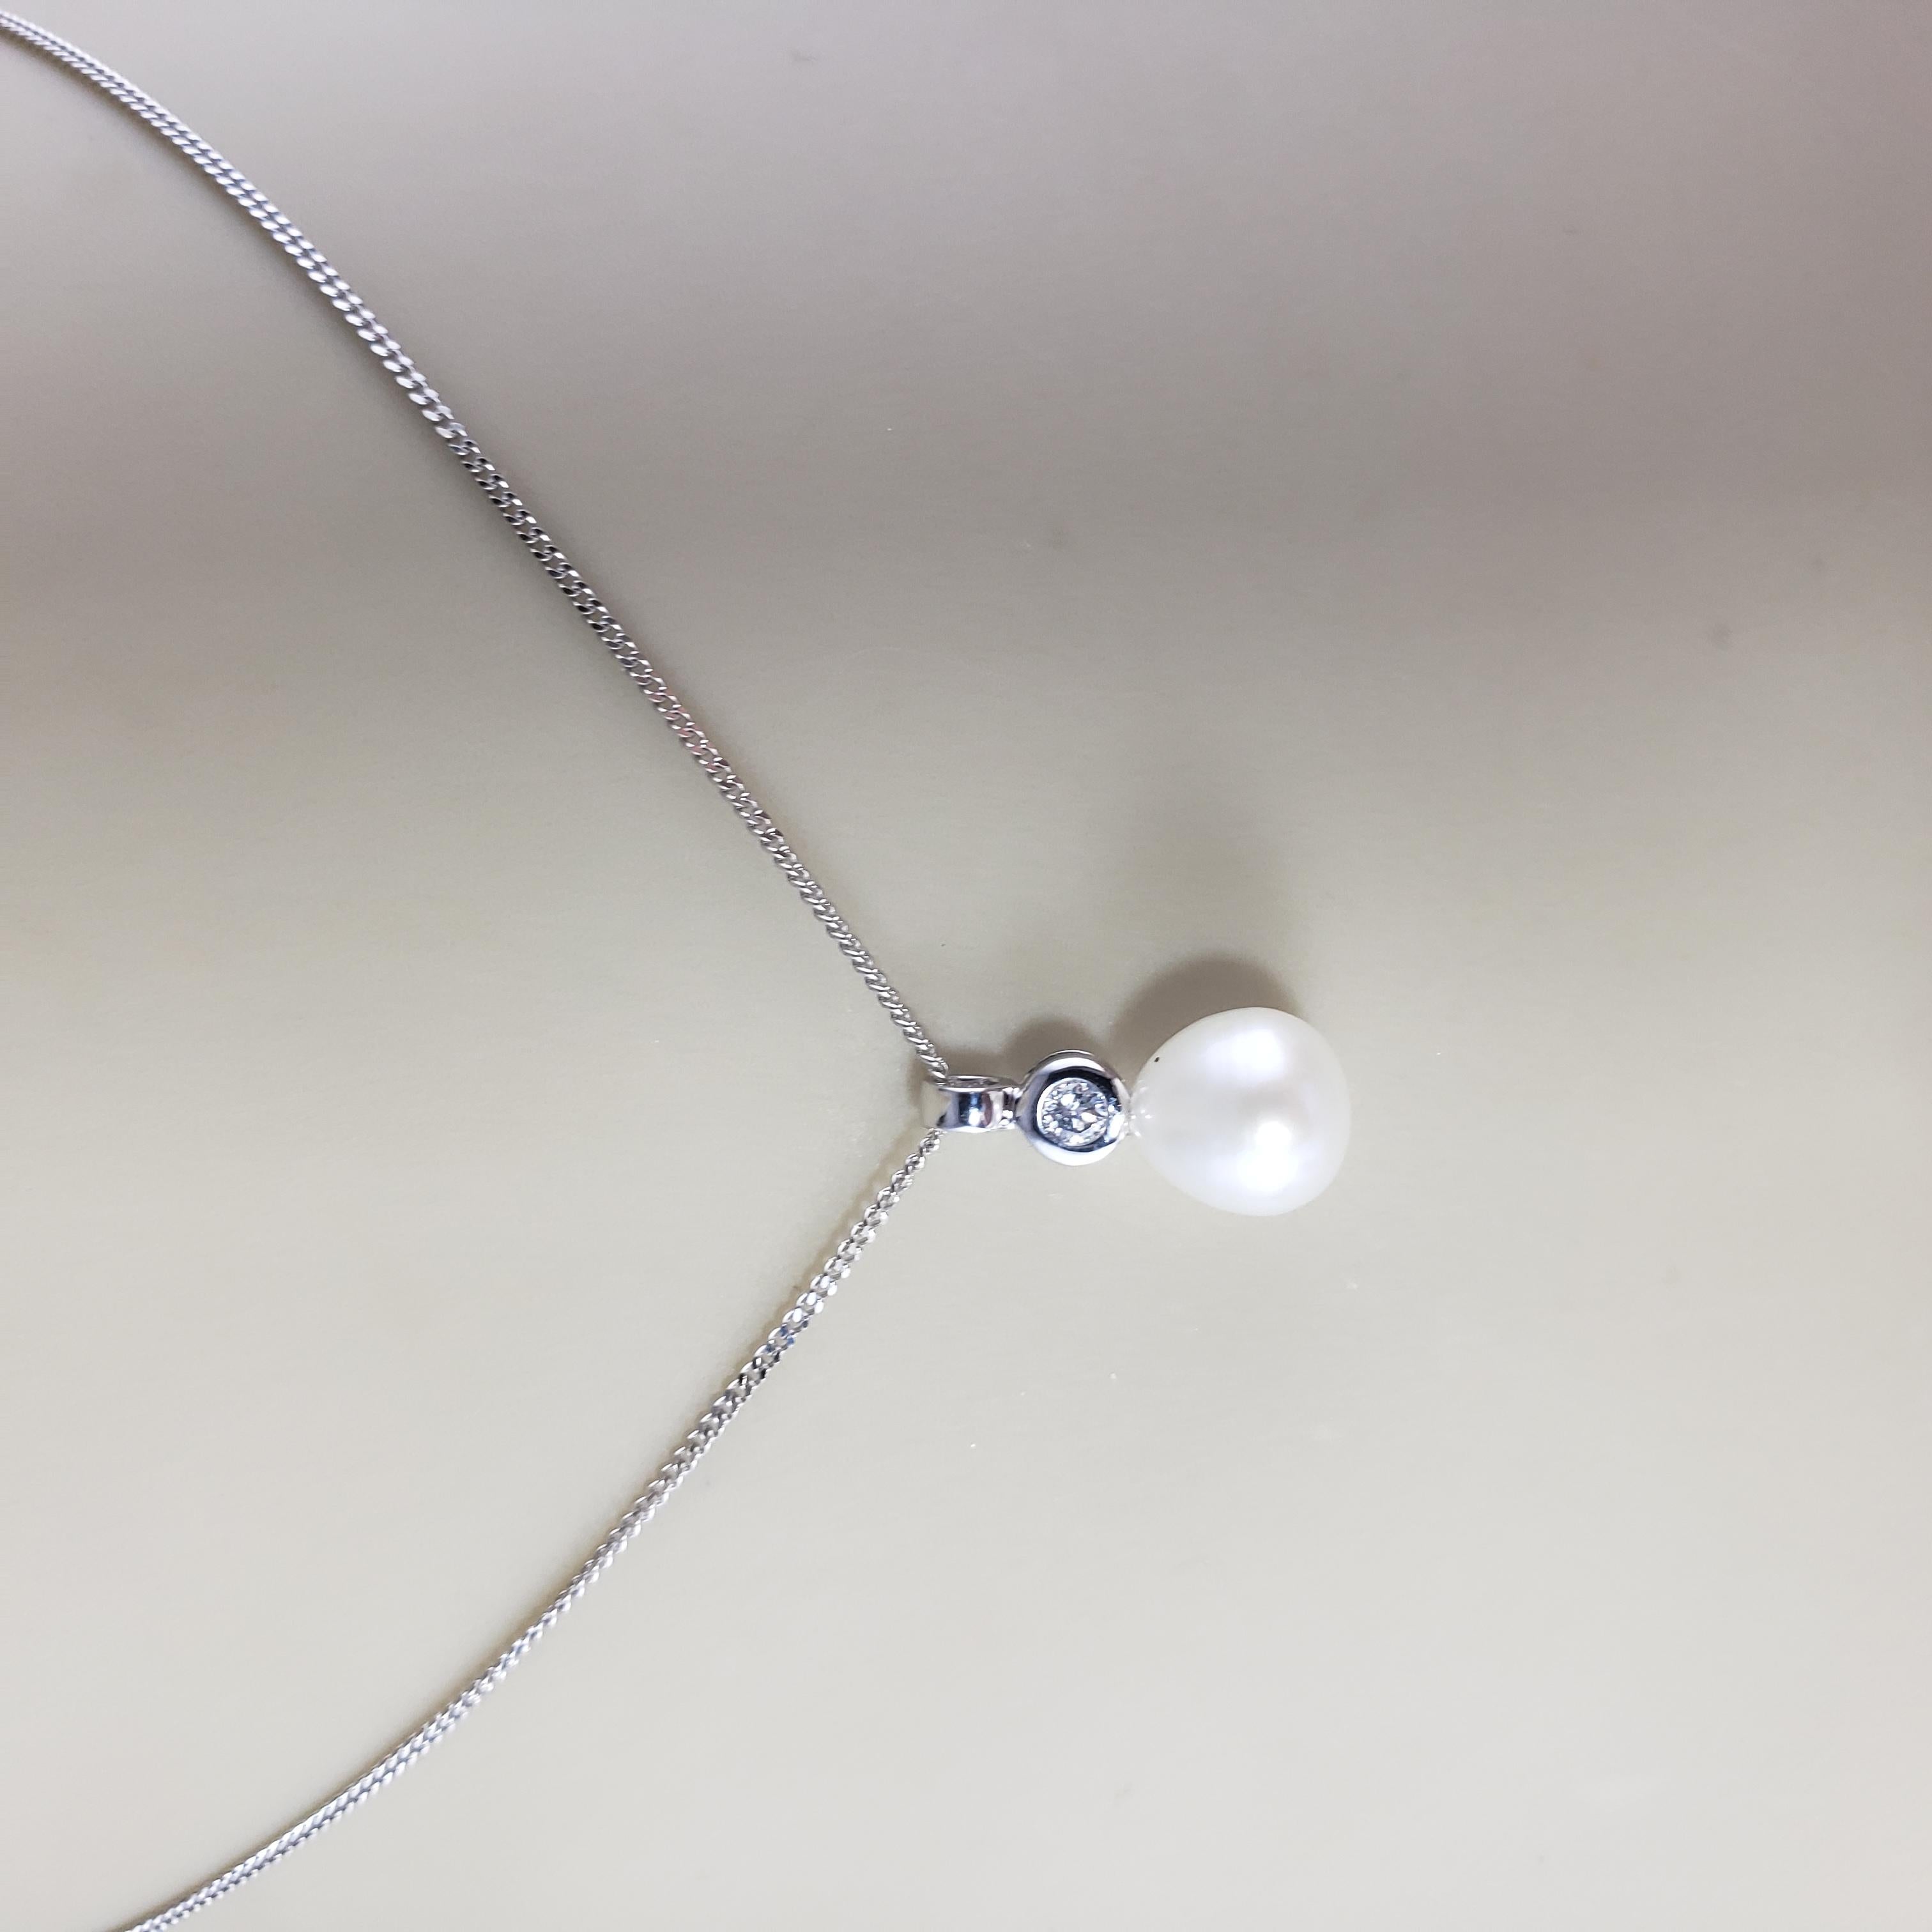 9 Karat White Gold Pearl and Diamond Pendant Necklace #14450 For Sale 2